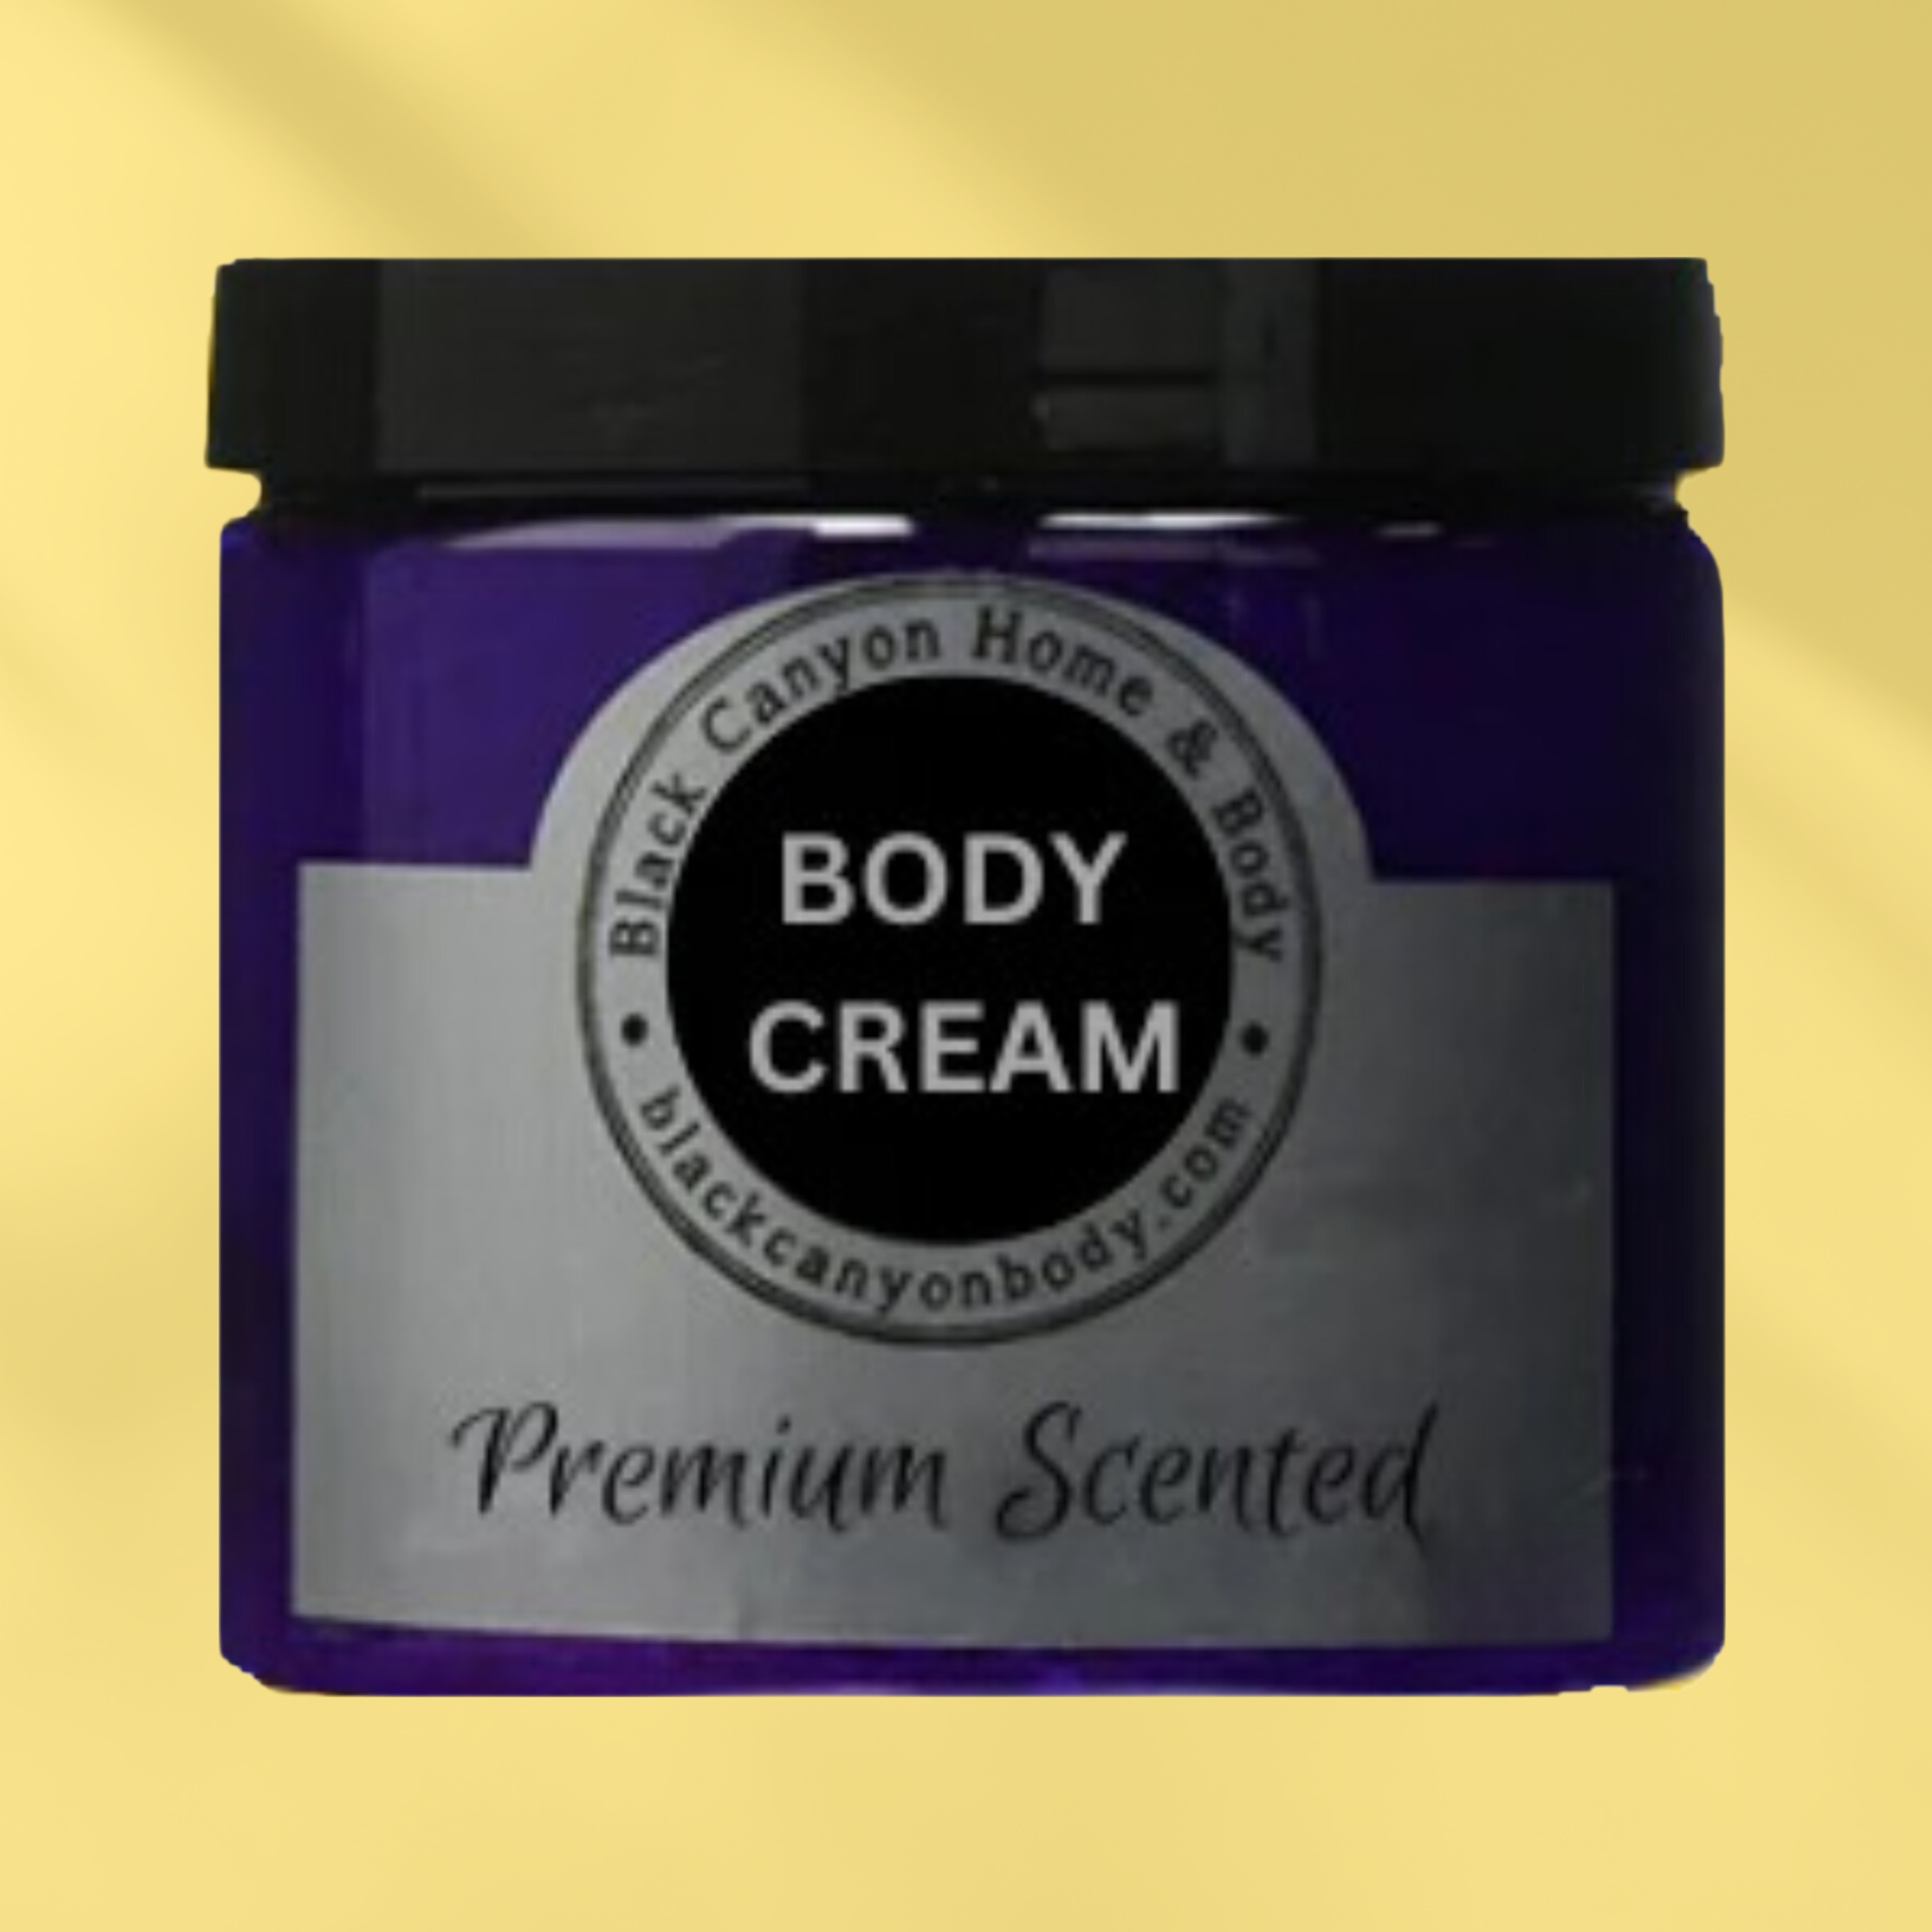 Black Canyon Berry Champagne Scented Luxury Body Cream with Aloe